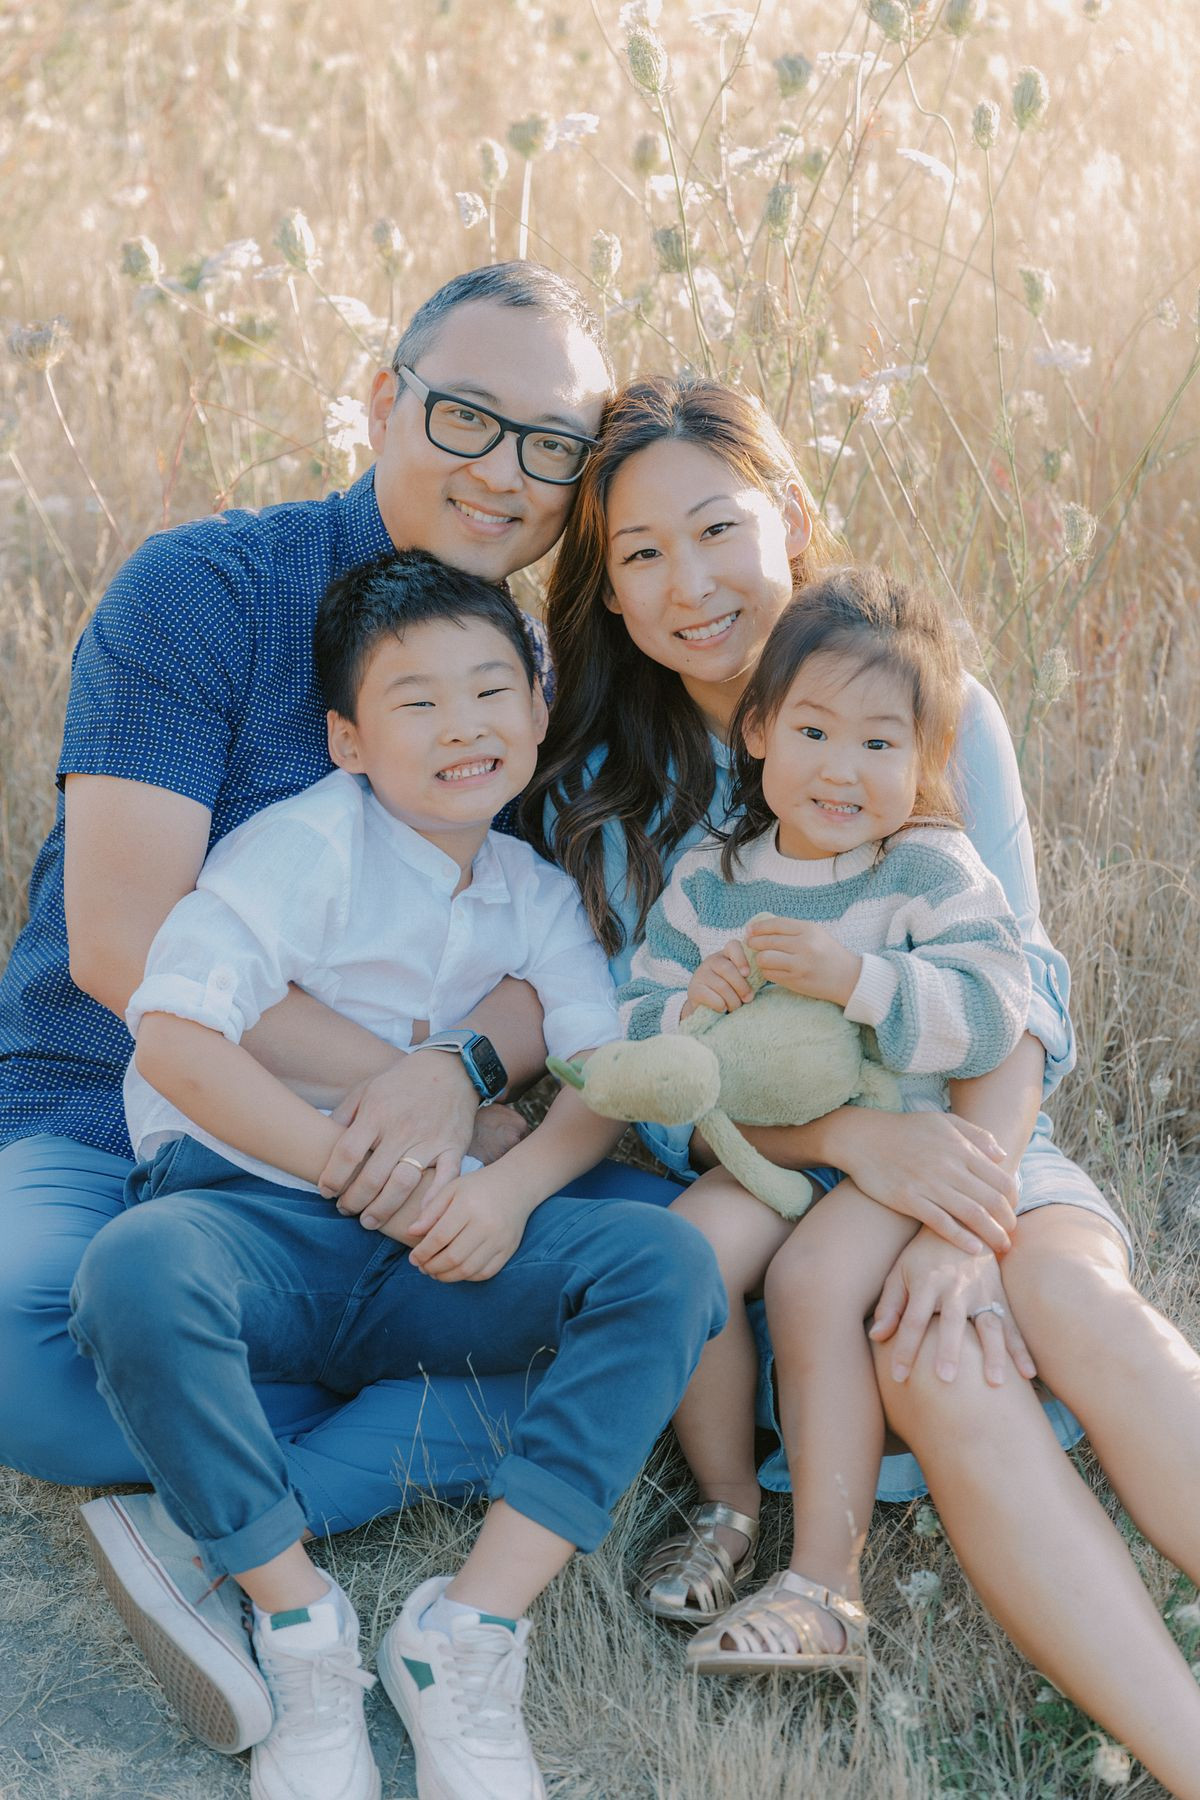 Park Family Portrait Photo by Yvonne Wong Photography at Discovery Park Seattle